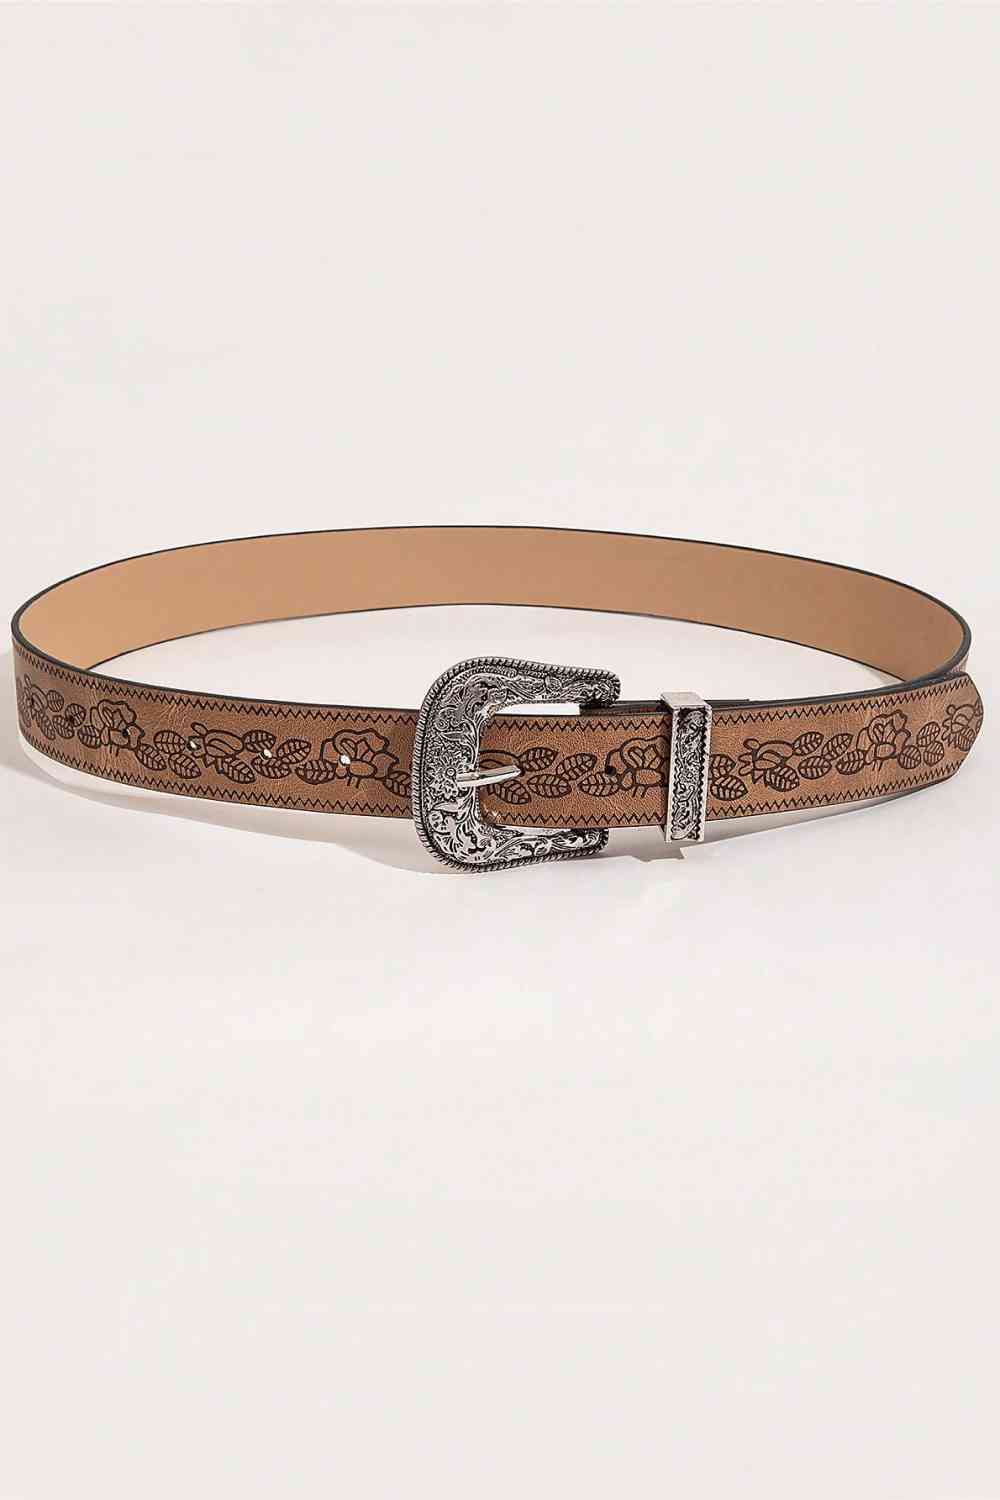 Floral PU Leather Belt Print on any thing USA/STOD clothes